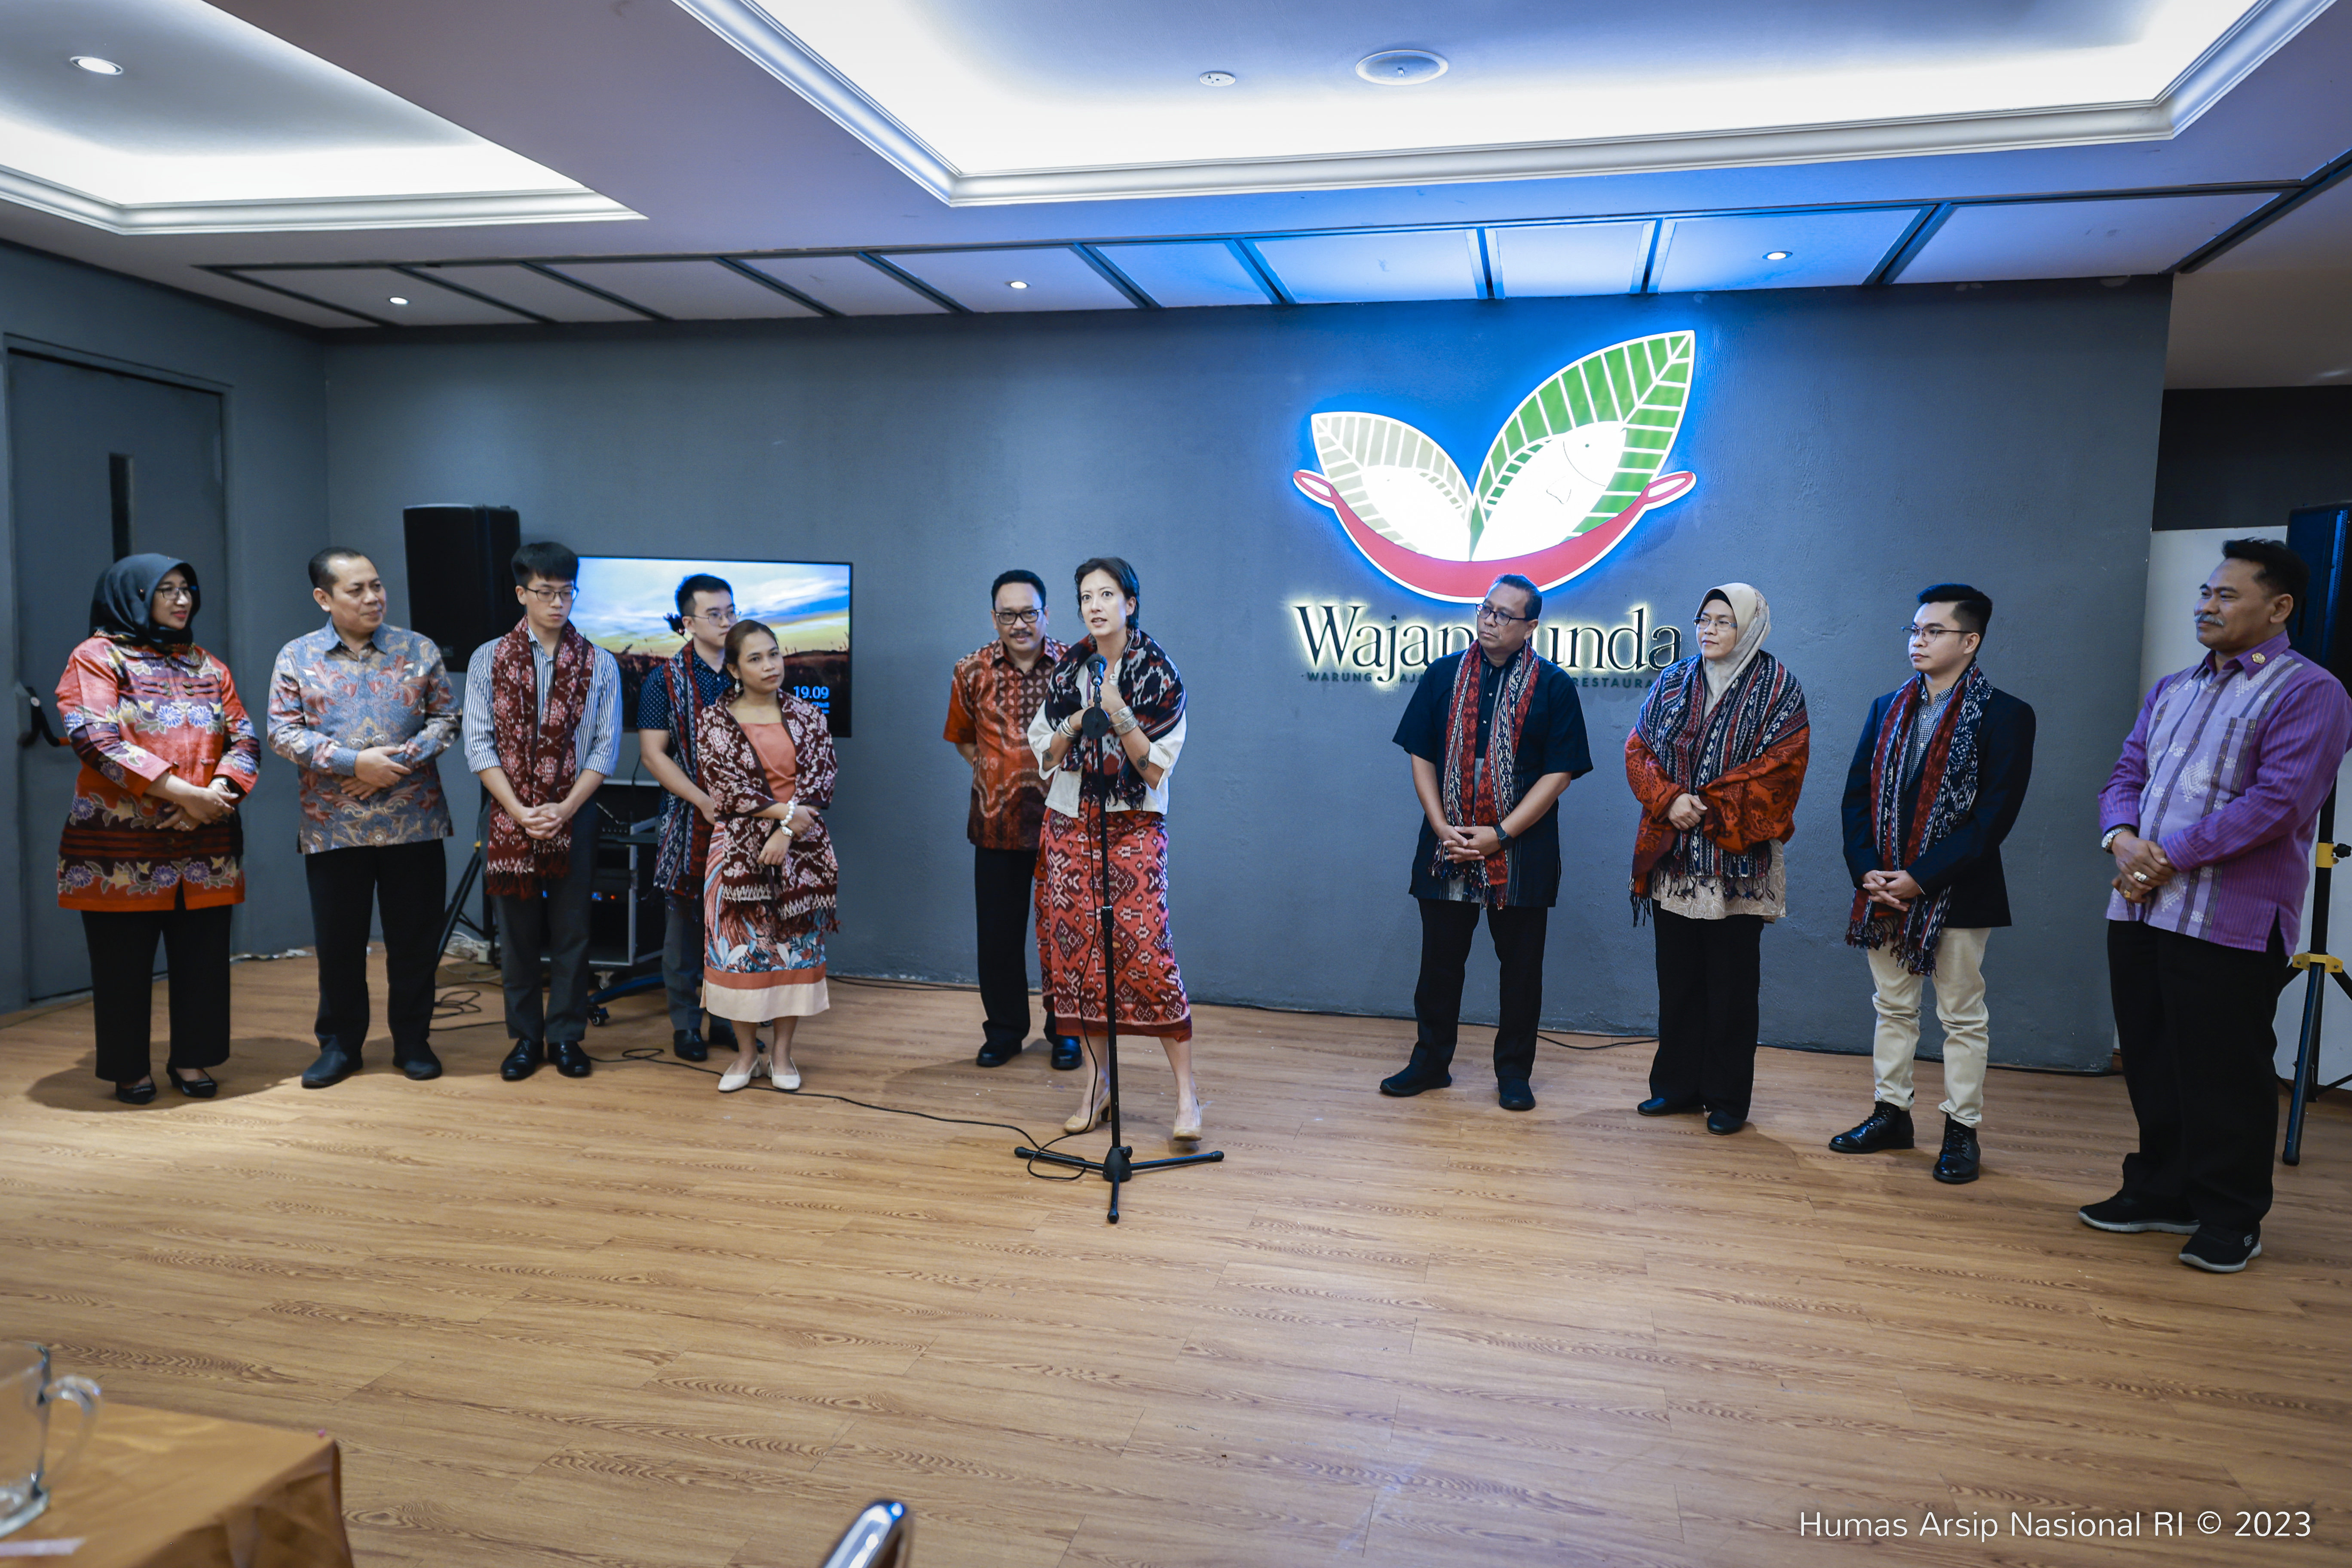 Delegasi ASEAN : "This is my first time to Jakarta"